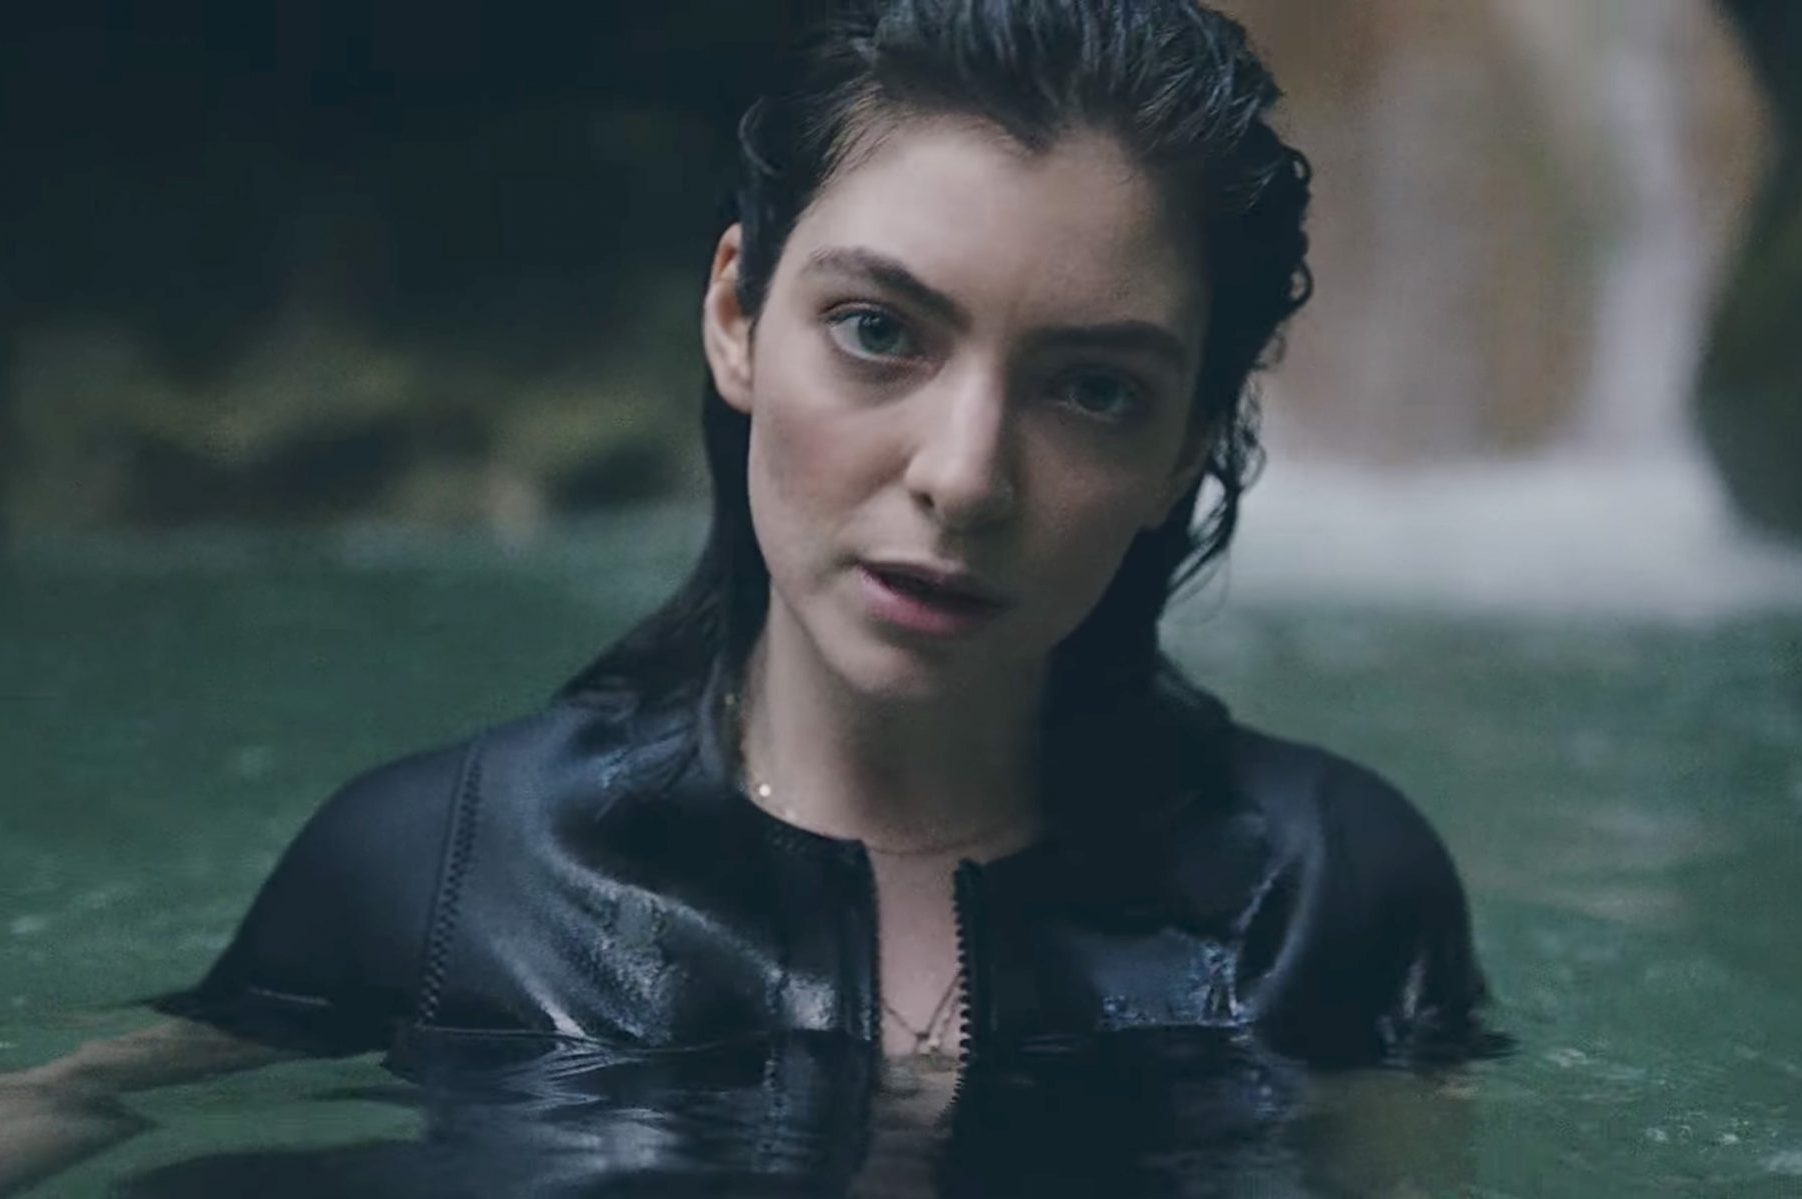 Lorde says third album on its way